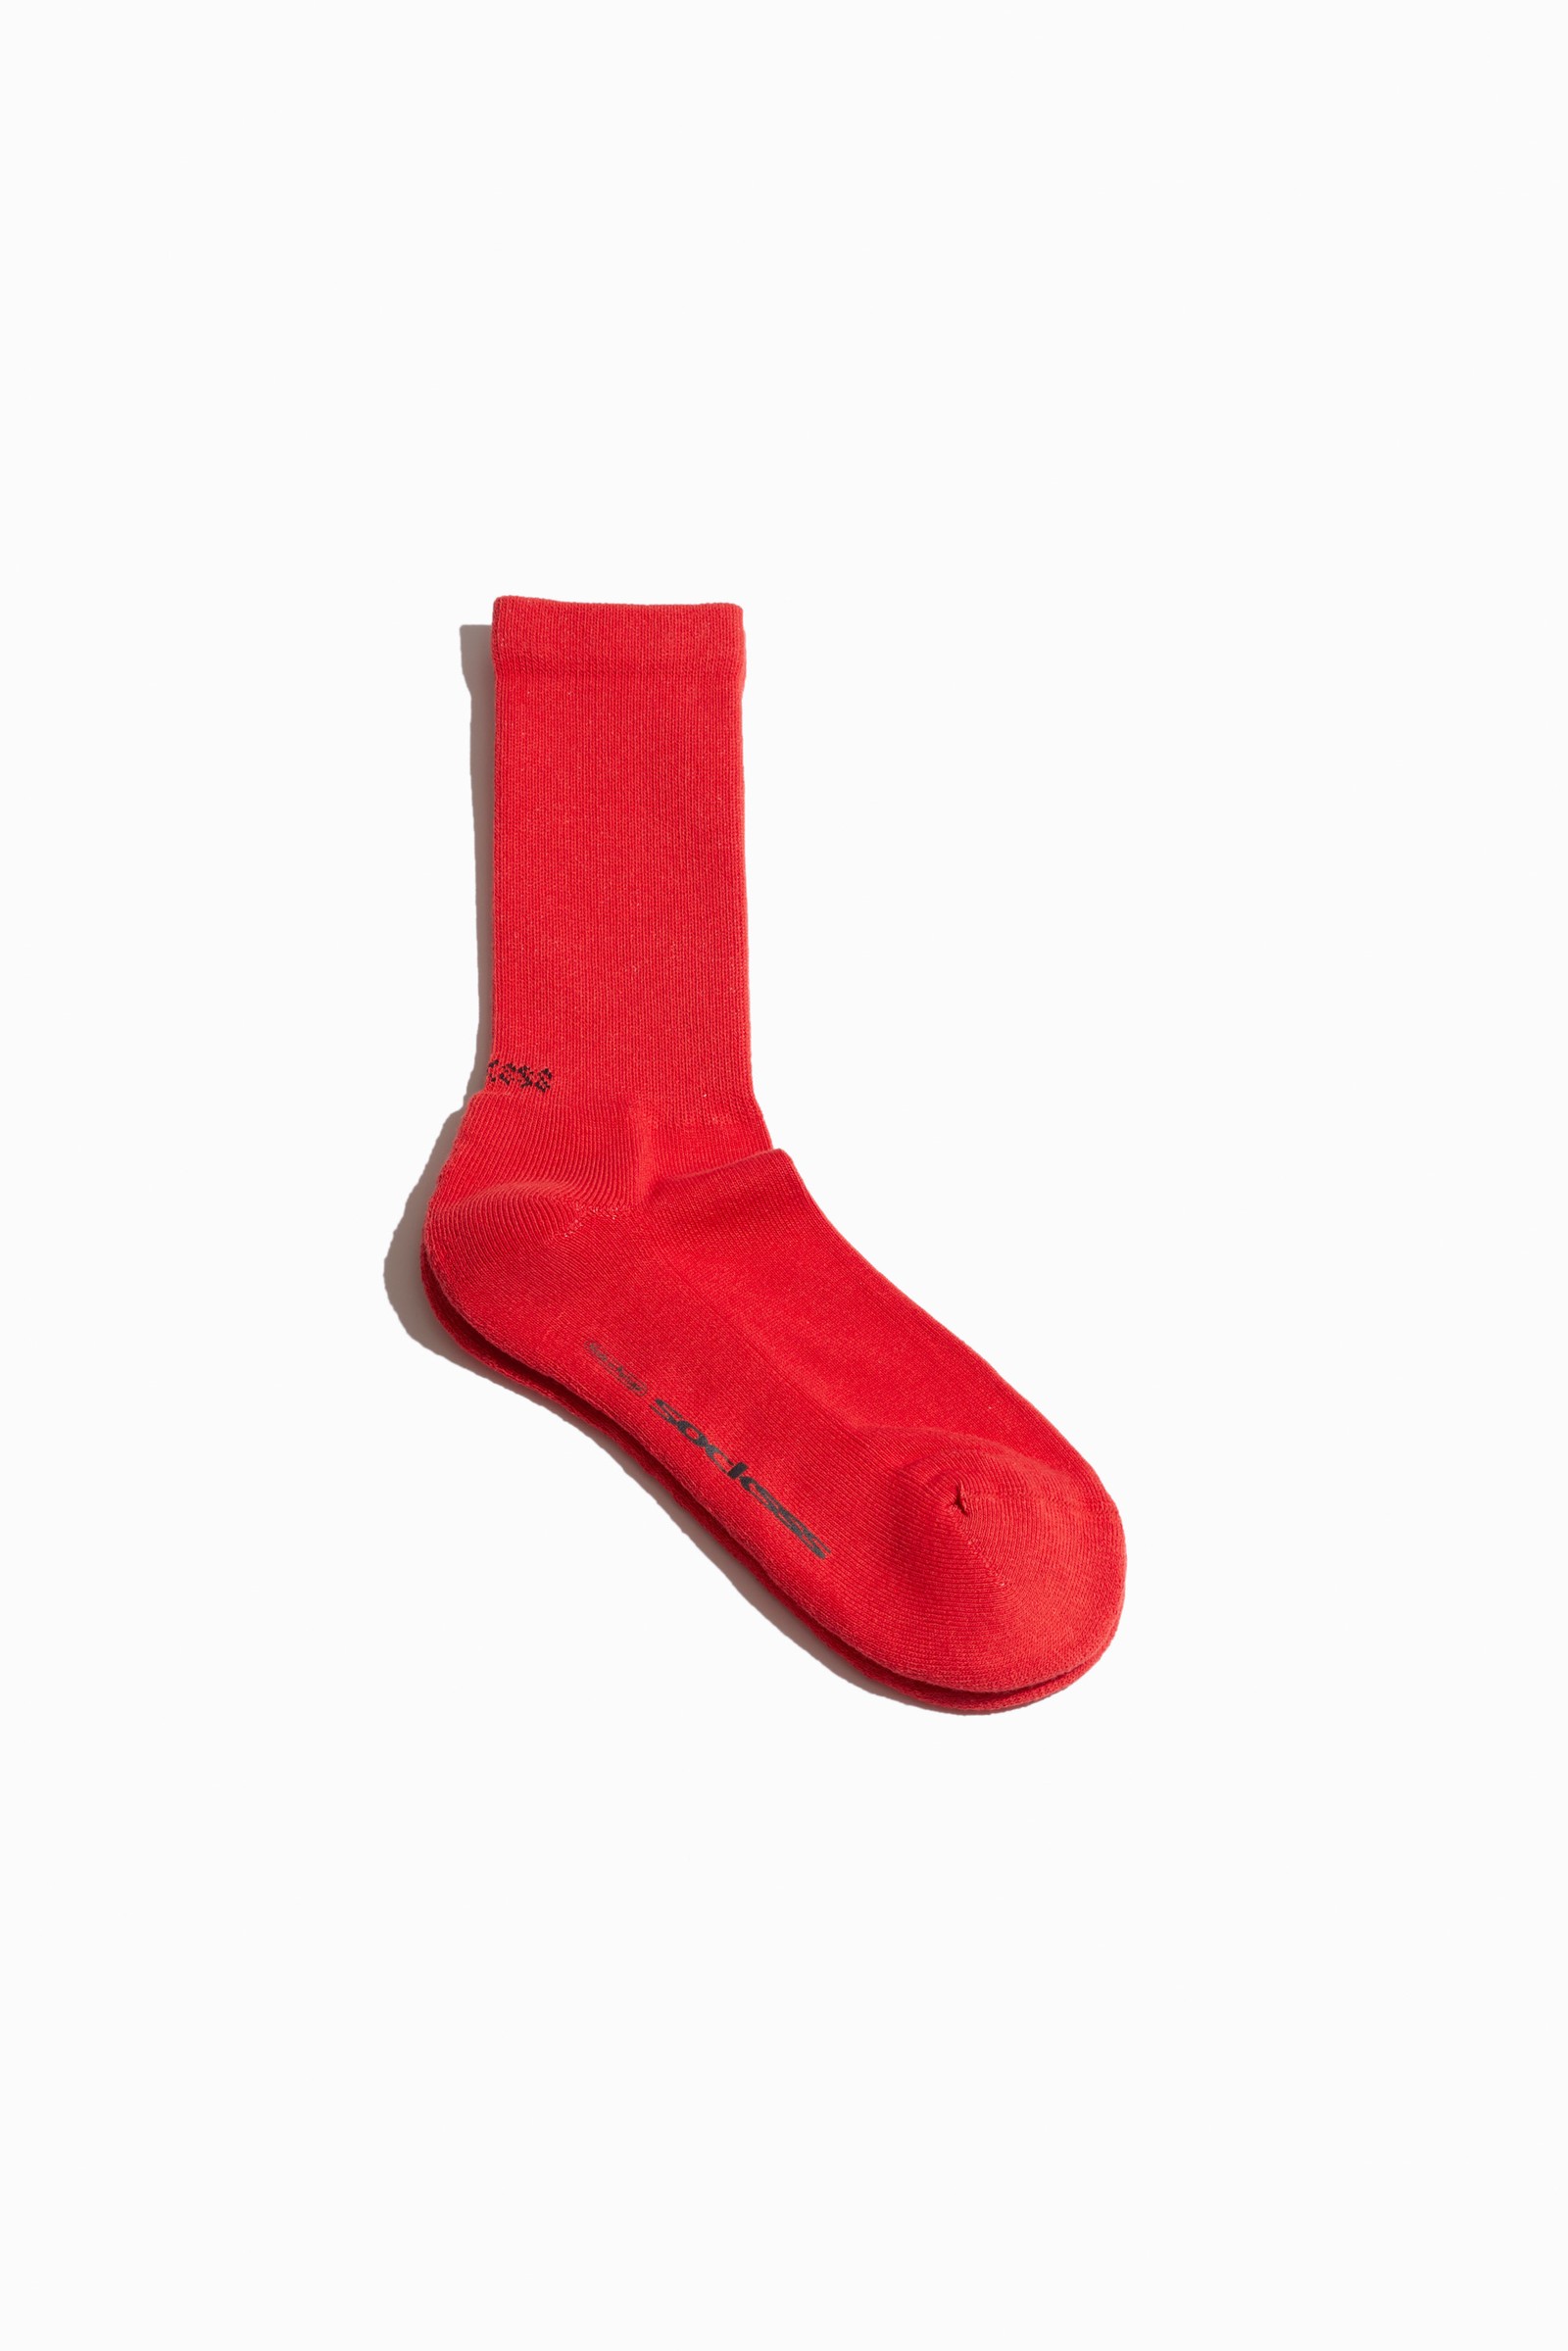 The Red Socks Trend is the Easiest Way to Update Your Outfit Now